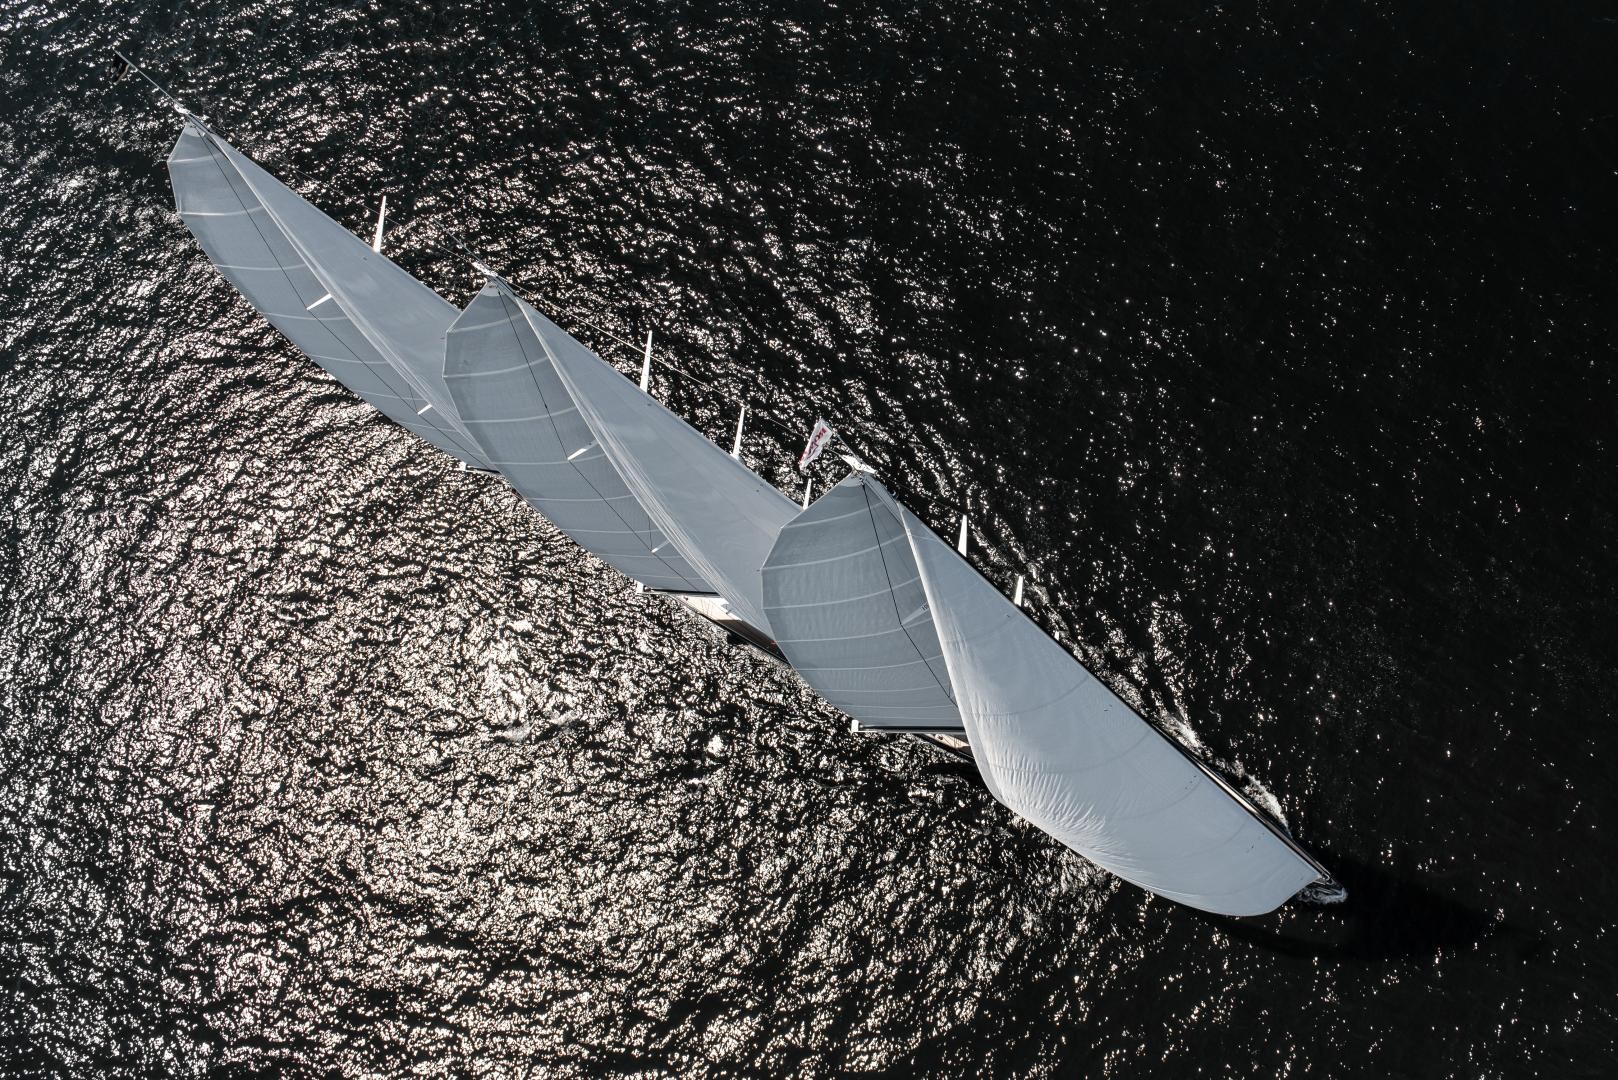 Doyle designed and built the sails for the 81m world cruising schooner Sea Eagle II, which sets 3,500sqm of canvas on a three-masted Rondal rig with carbon composite rigging. Easy sail handling was clearly paramount for such a large yacht but sailing performance was equally a high priority